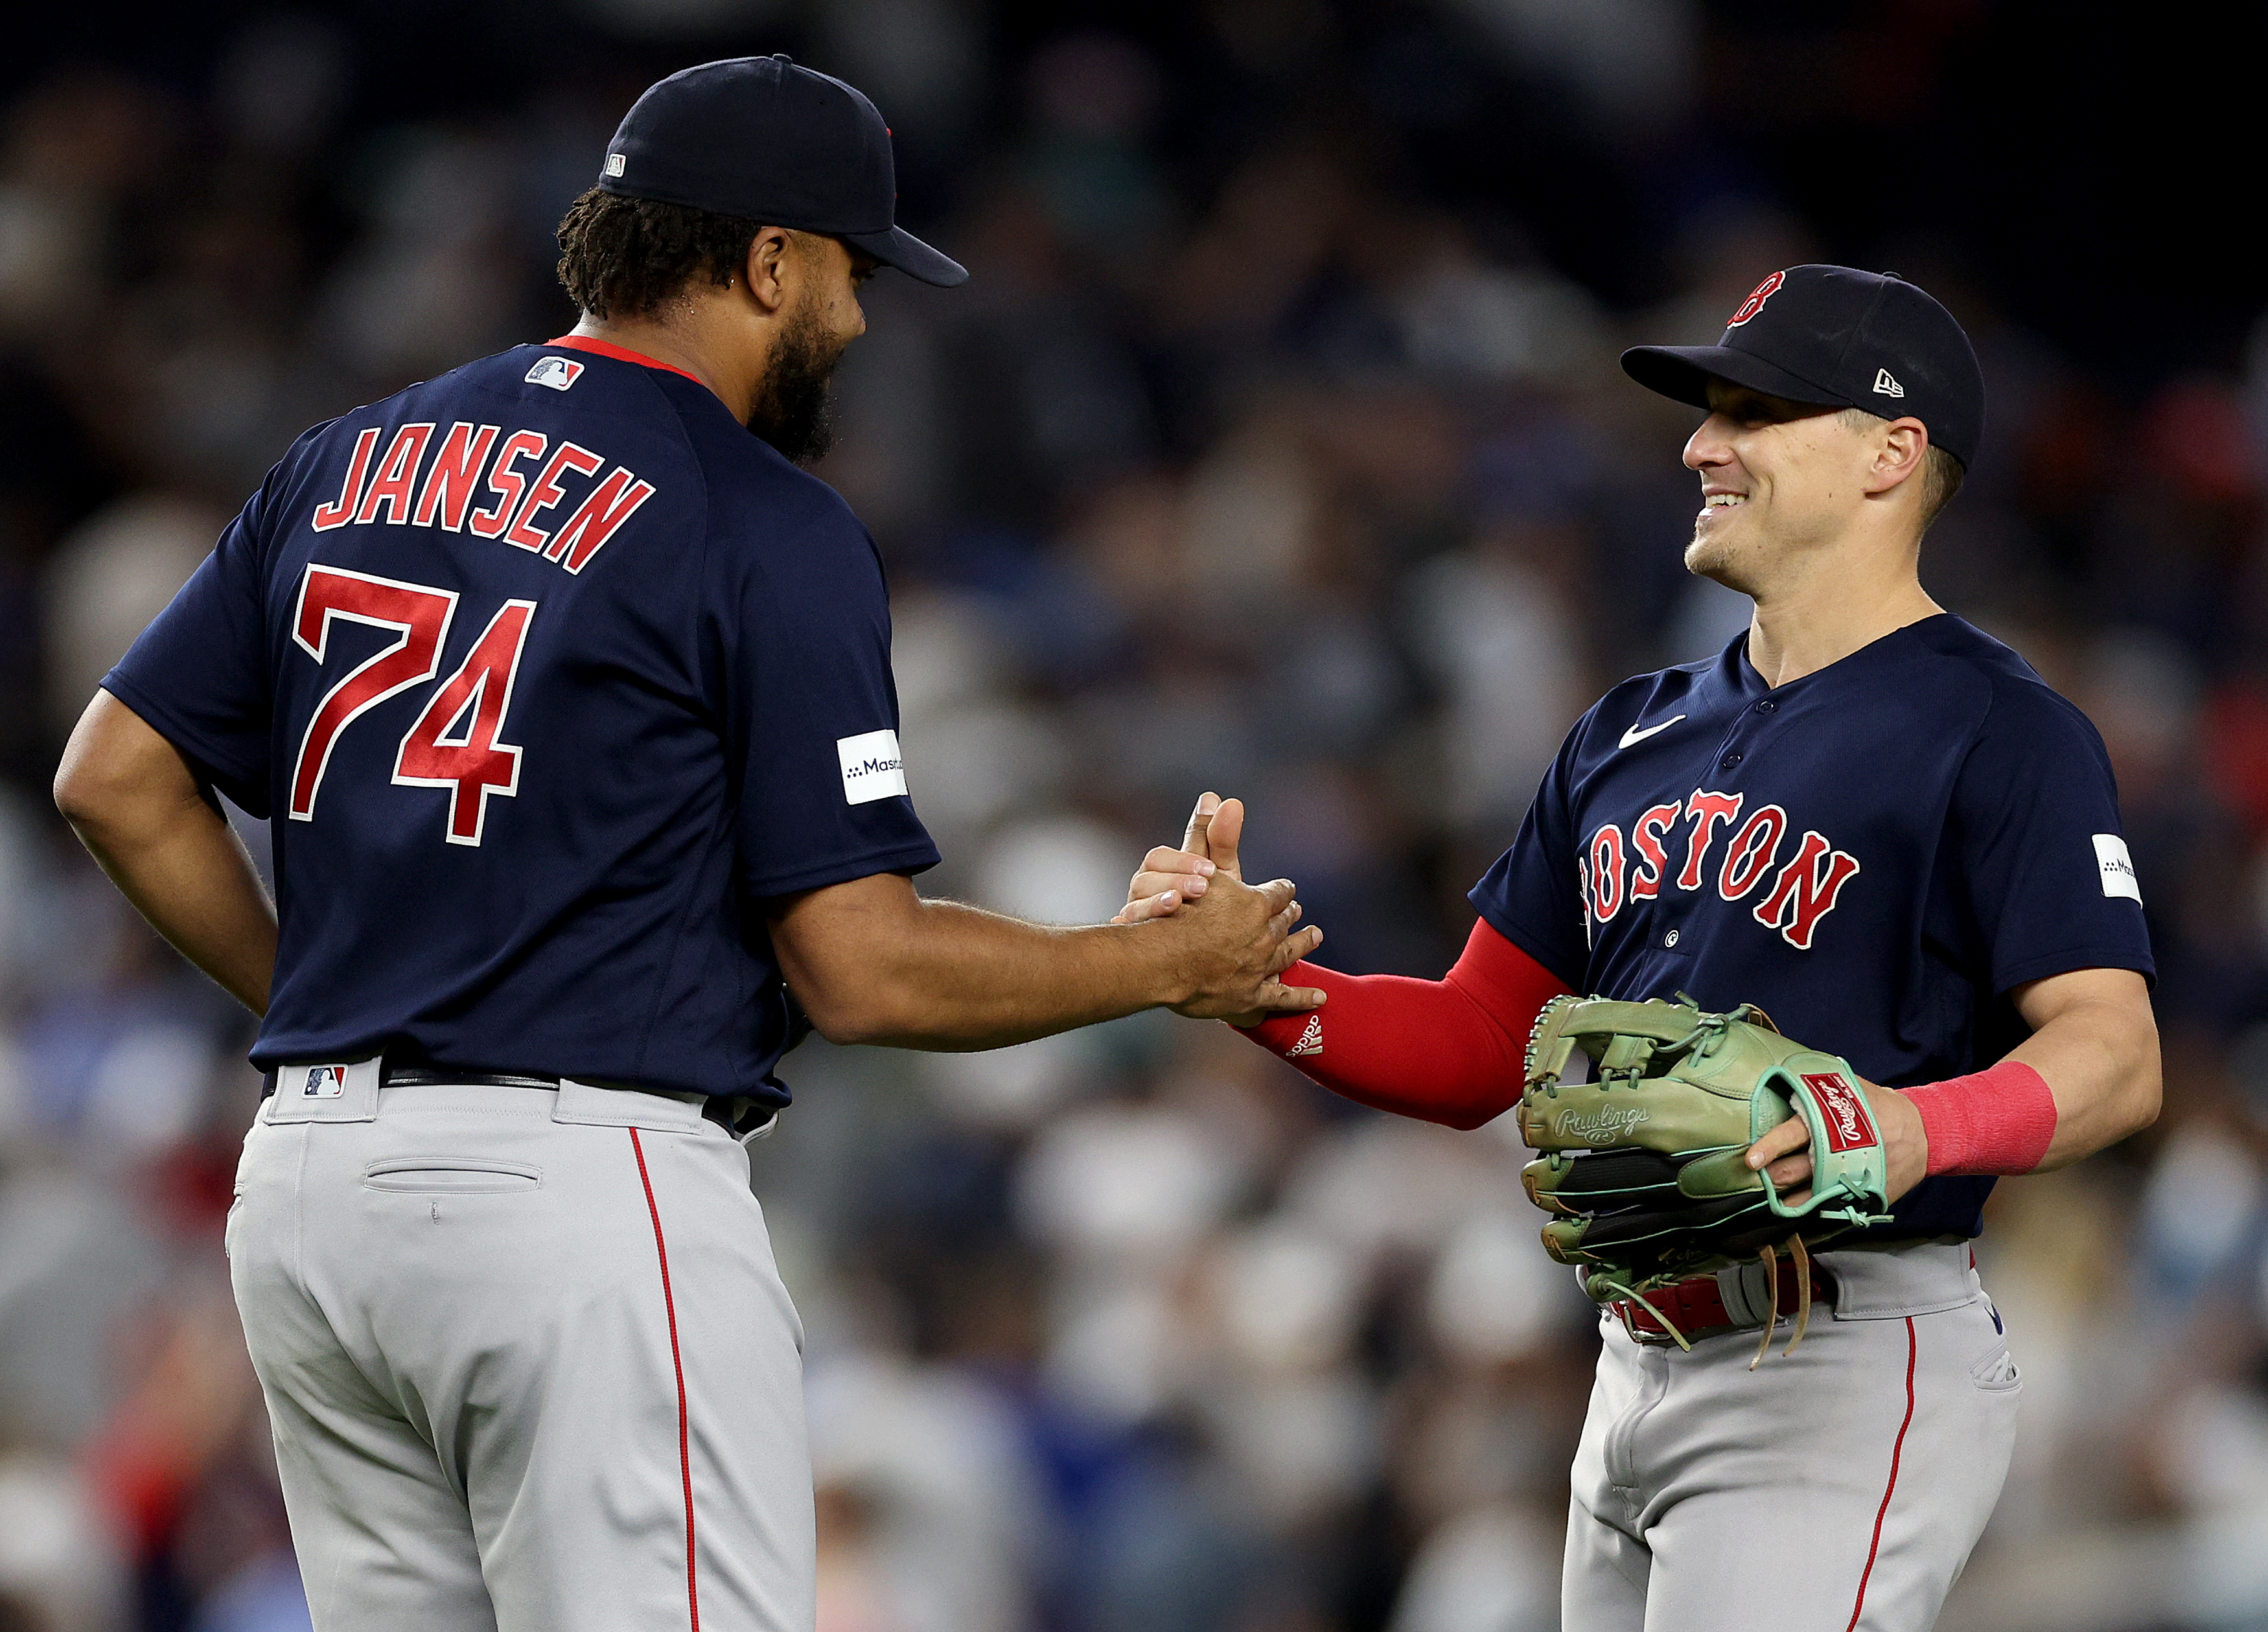 It doesn't matter where they are in the standings, Red Sox-Yankees games  are still special - The Boston Globe